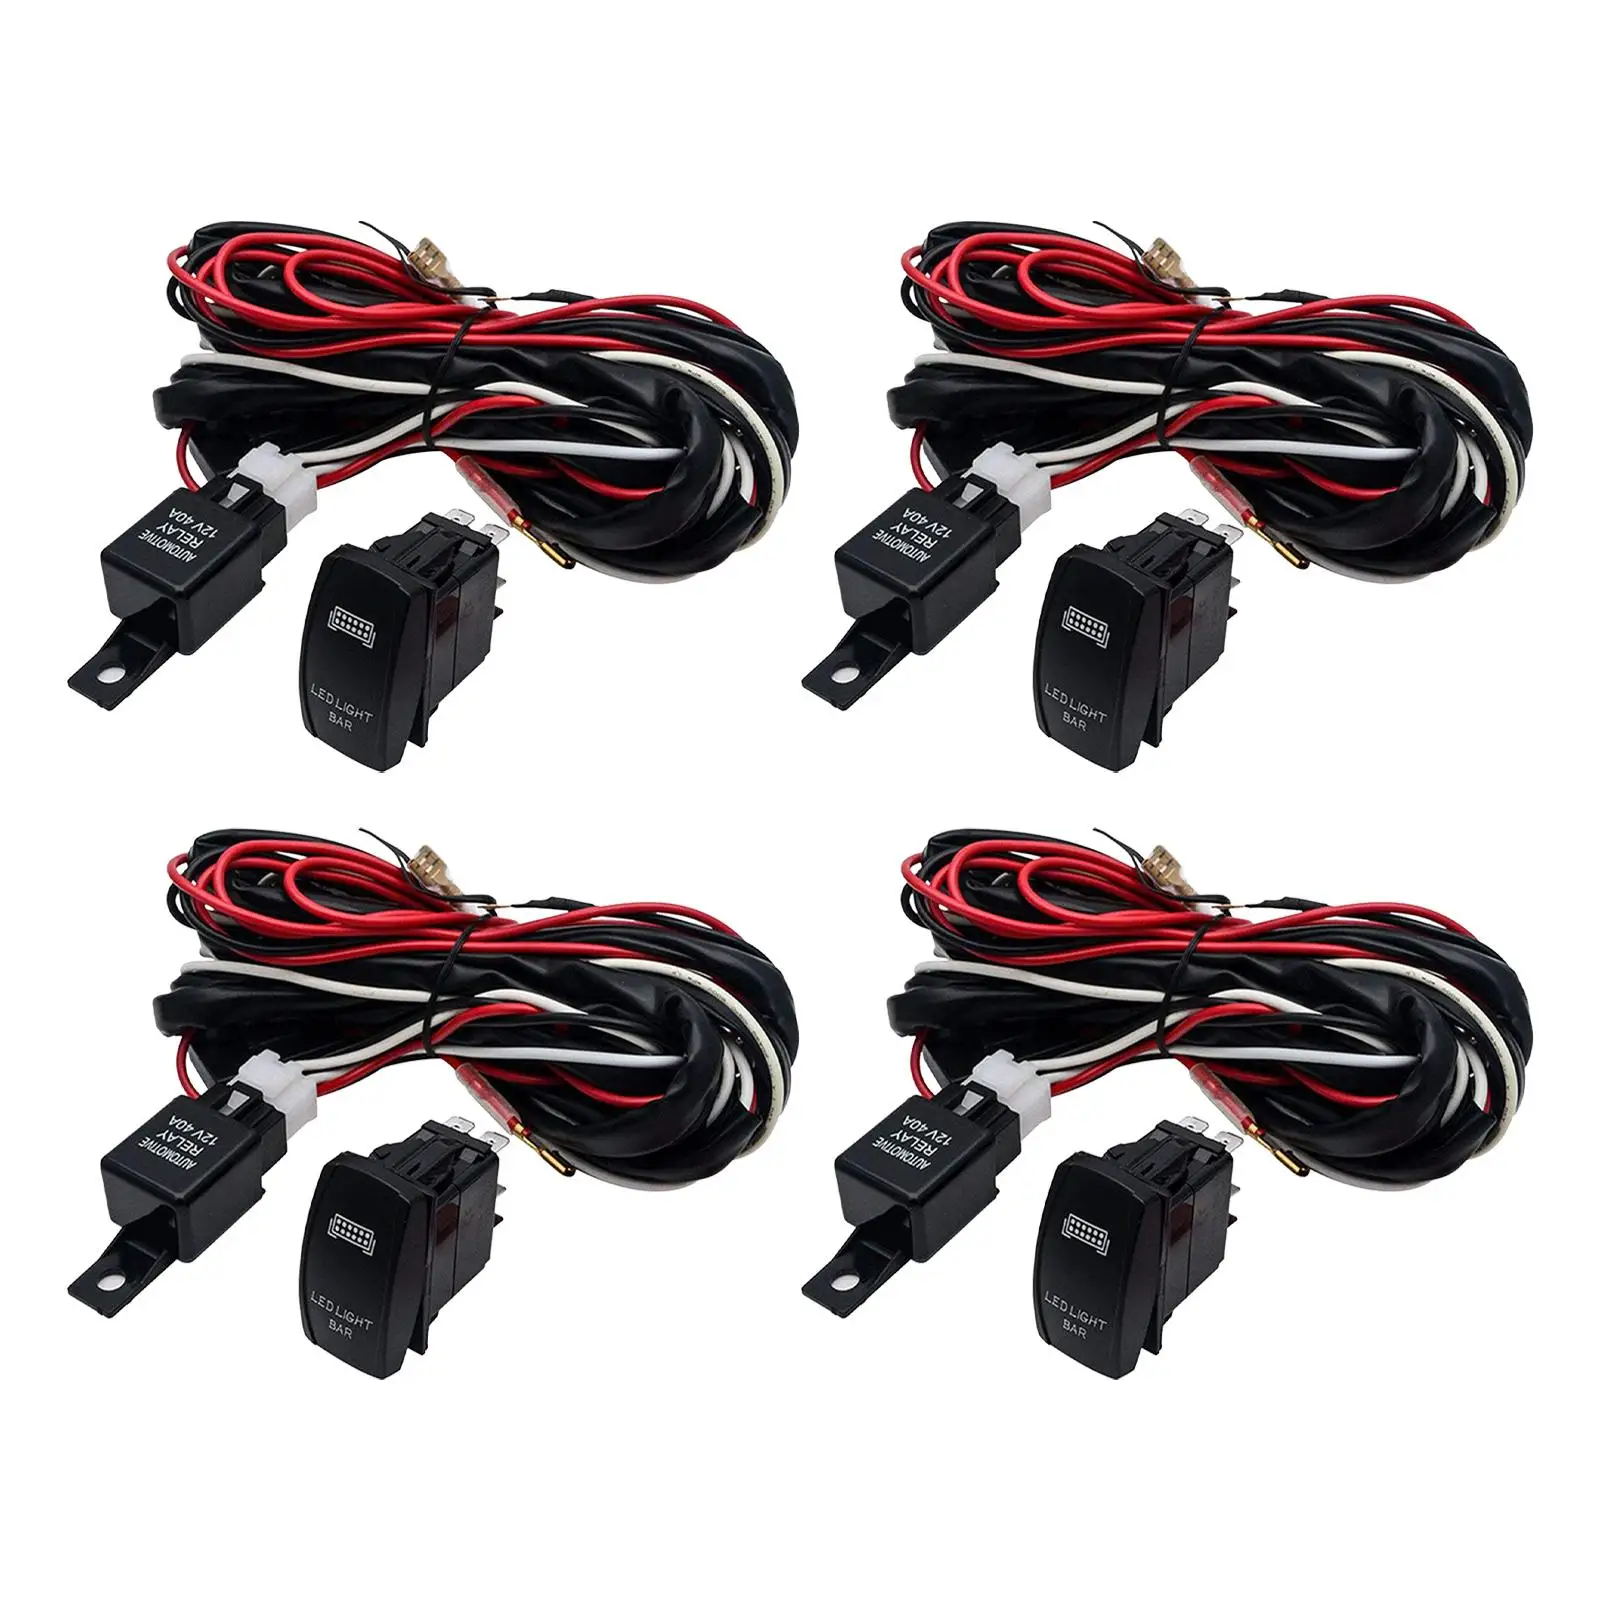 

LED Work Light Switch Wiring Harness 40A Relay Fuse Kit 12V Led Bar Rocker Switch Wiring Harness for Ship Yacht RV